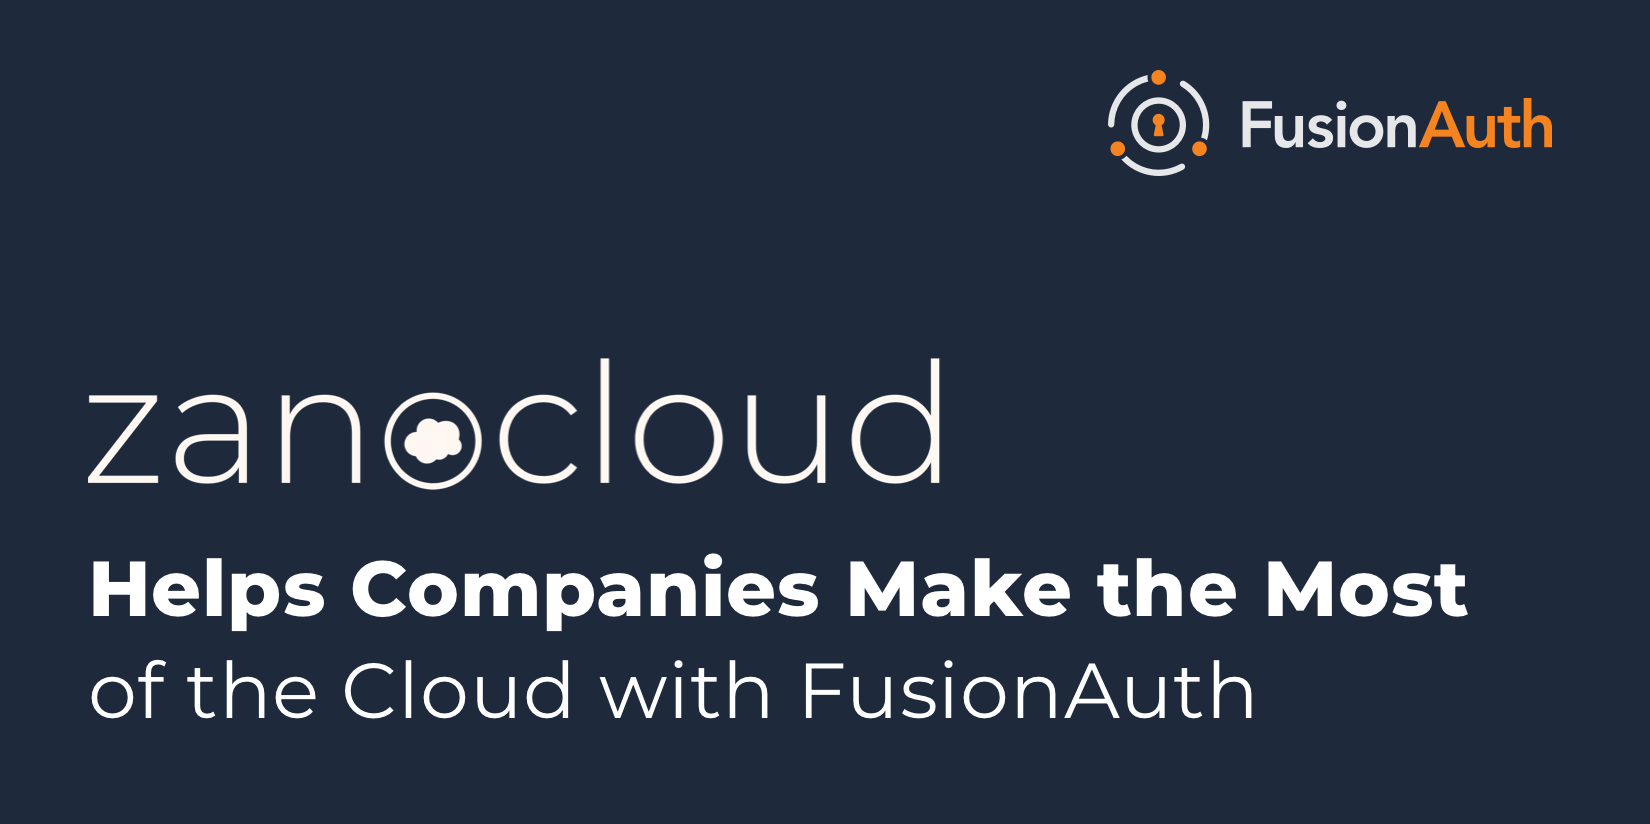 ZanoCloud helps companies make the most of the cloud with FusionAuth